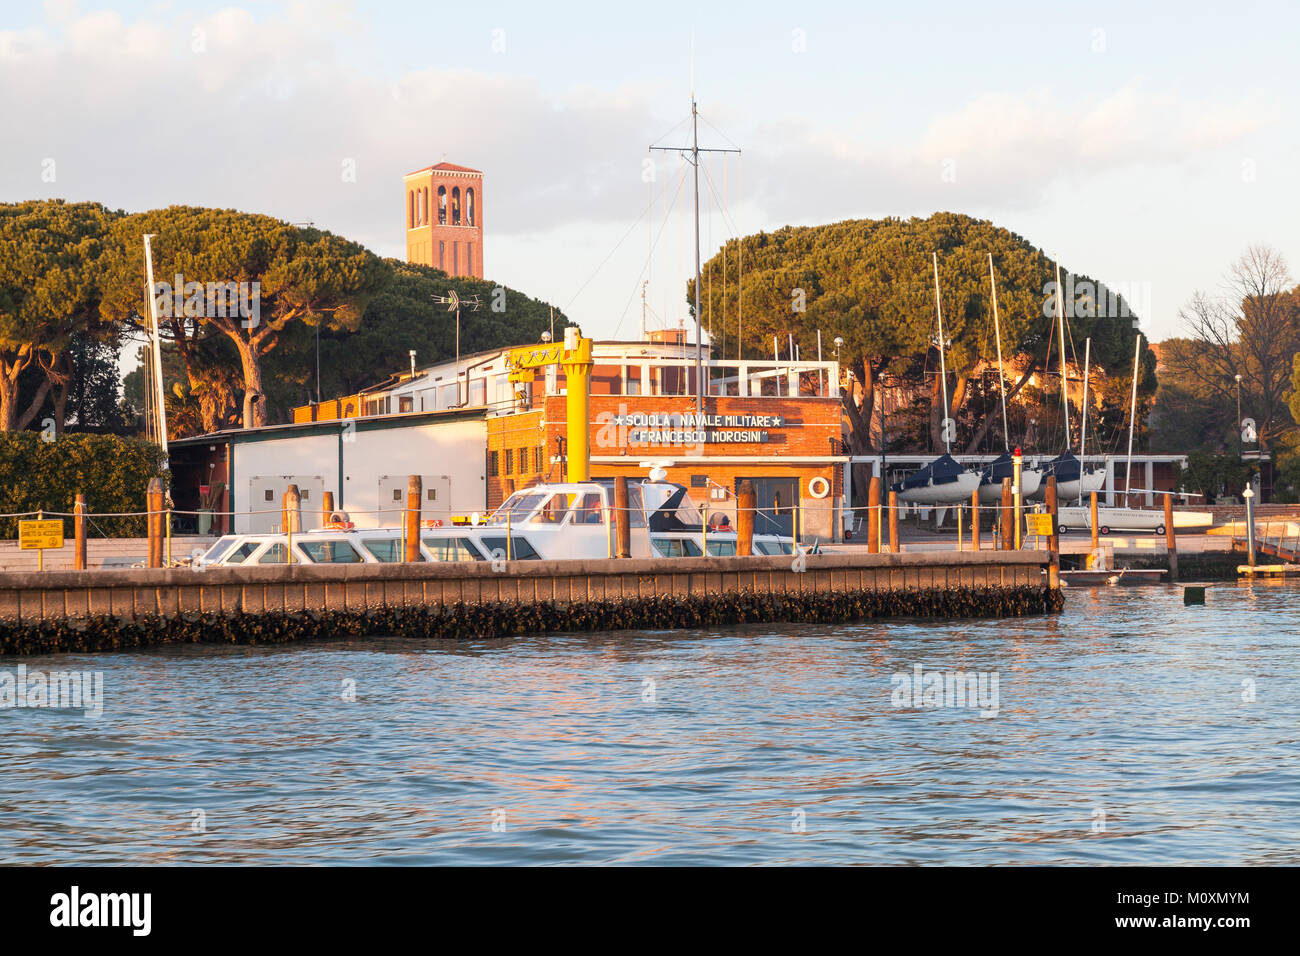 Exterior of the Scuola Navale Militare Francesco Morosini, or Francesco Morosini Naval Military School,  Venice, Veneto, Italy at sunset from the lago Stock Photo